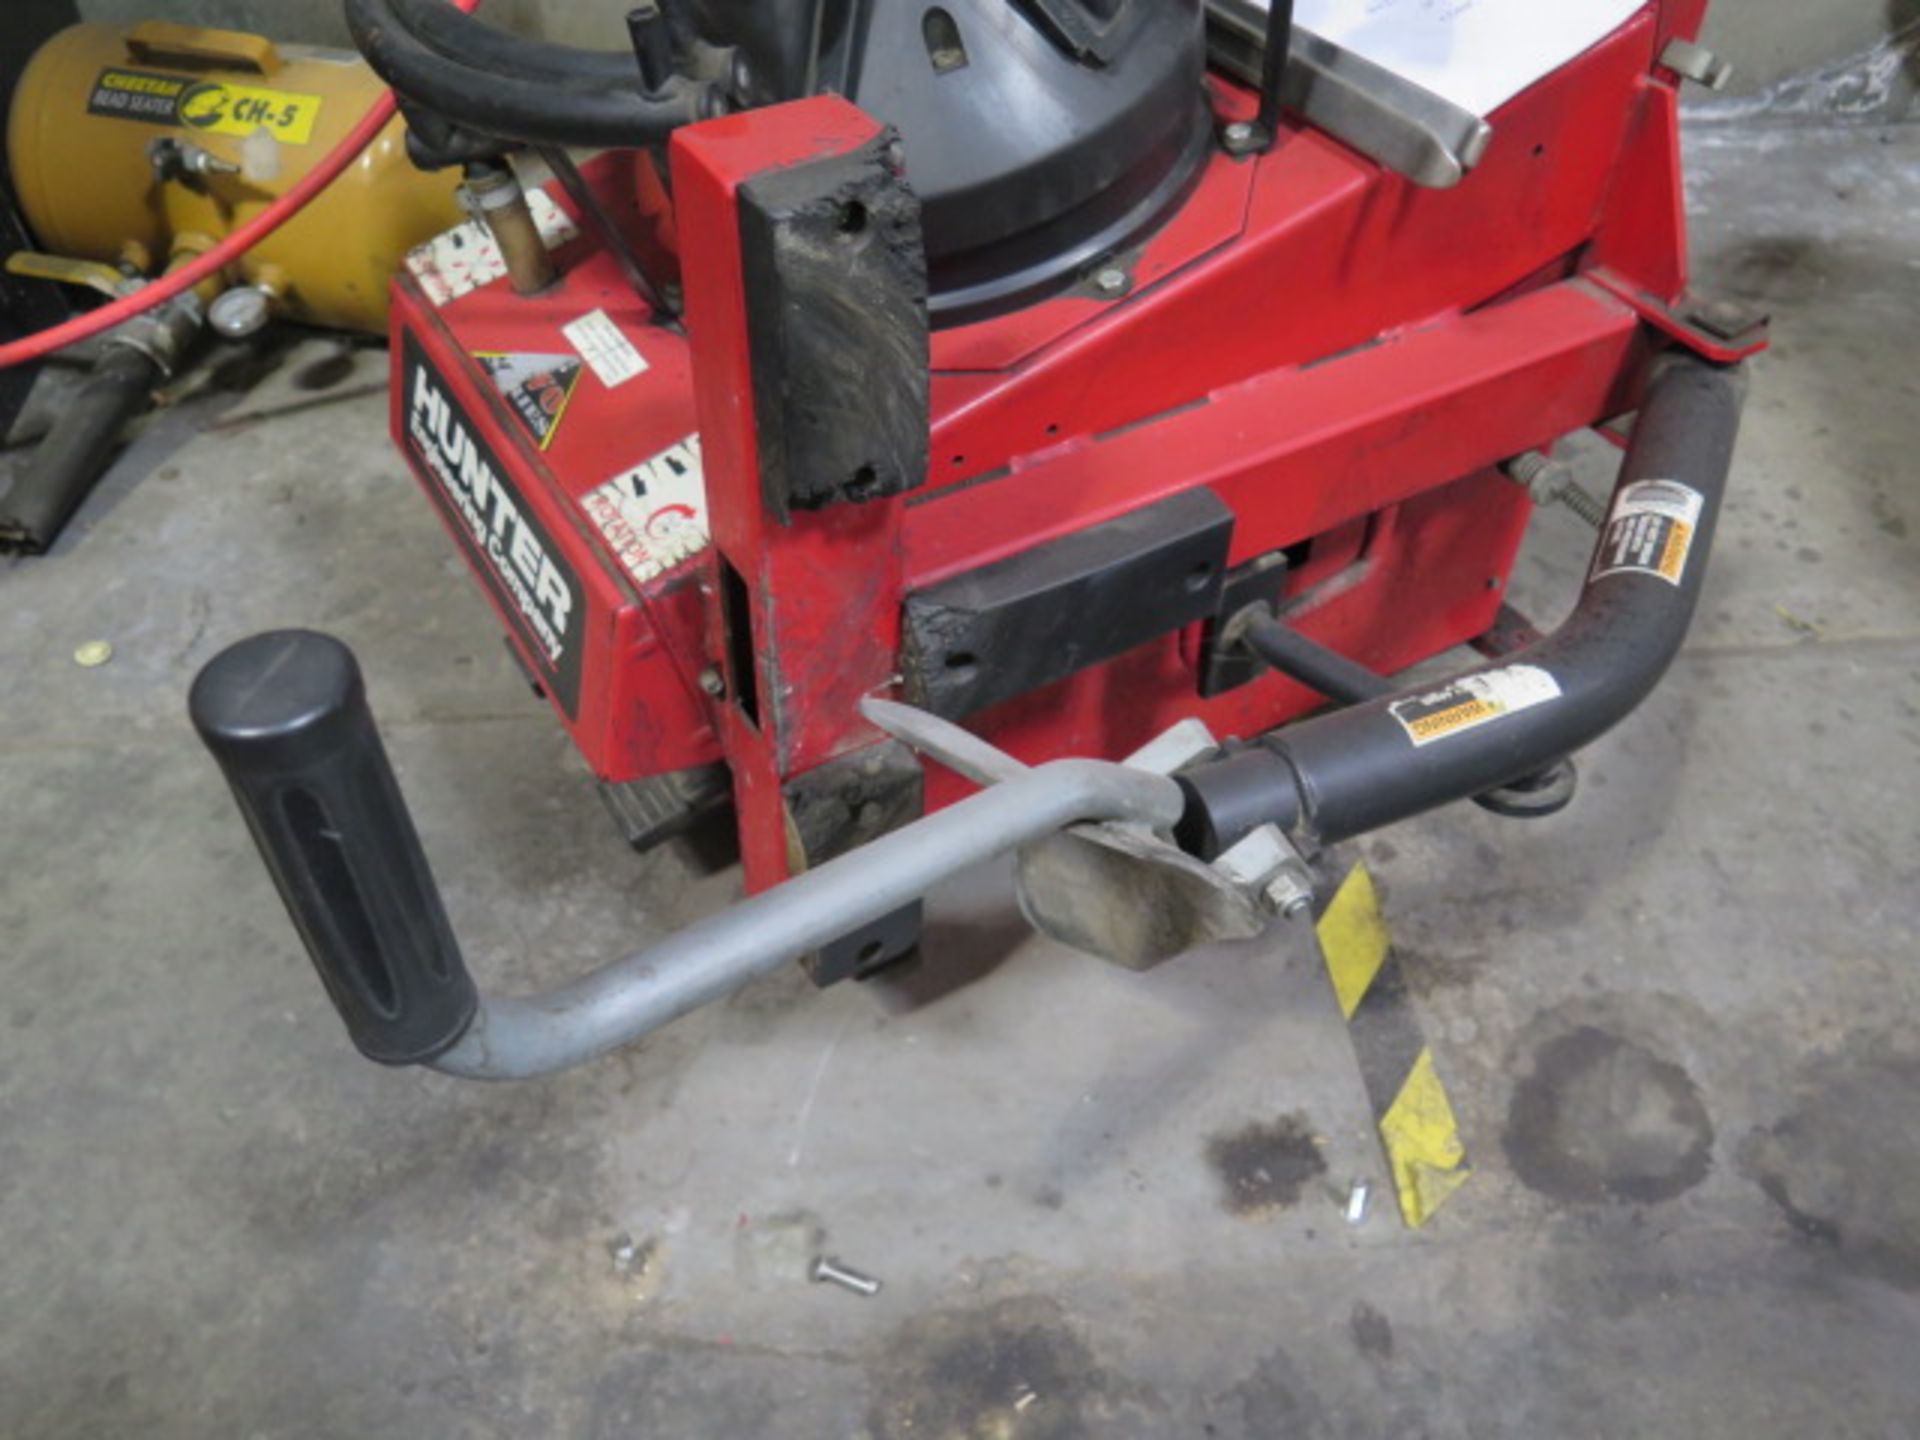 Hunter TC3250 mdl. 102K000 Tire Mounting Machine s/n 16696 (SOLD AS-IS - NO WARRANTY) - Image 7 of 18